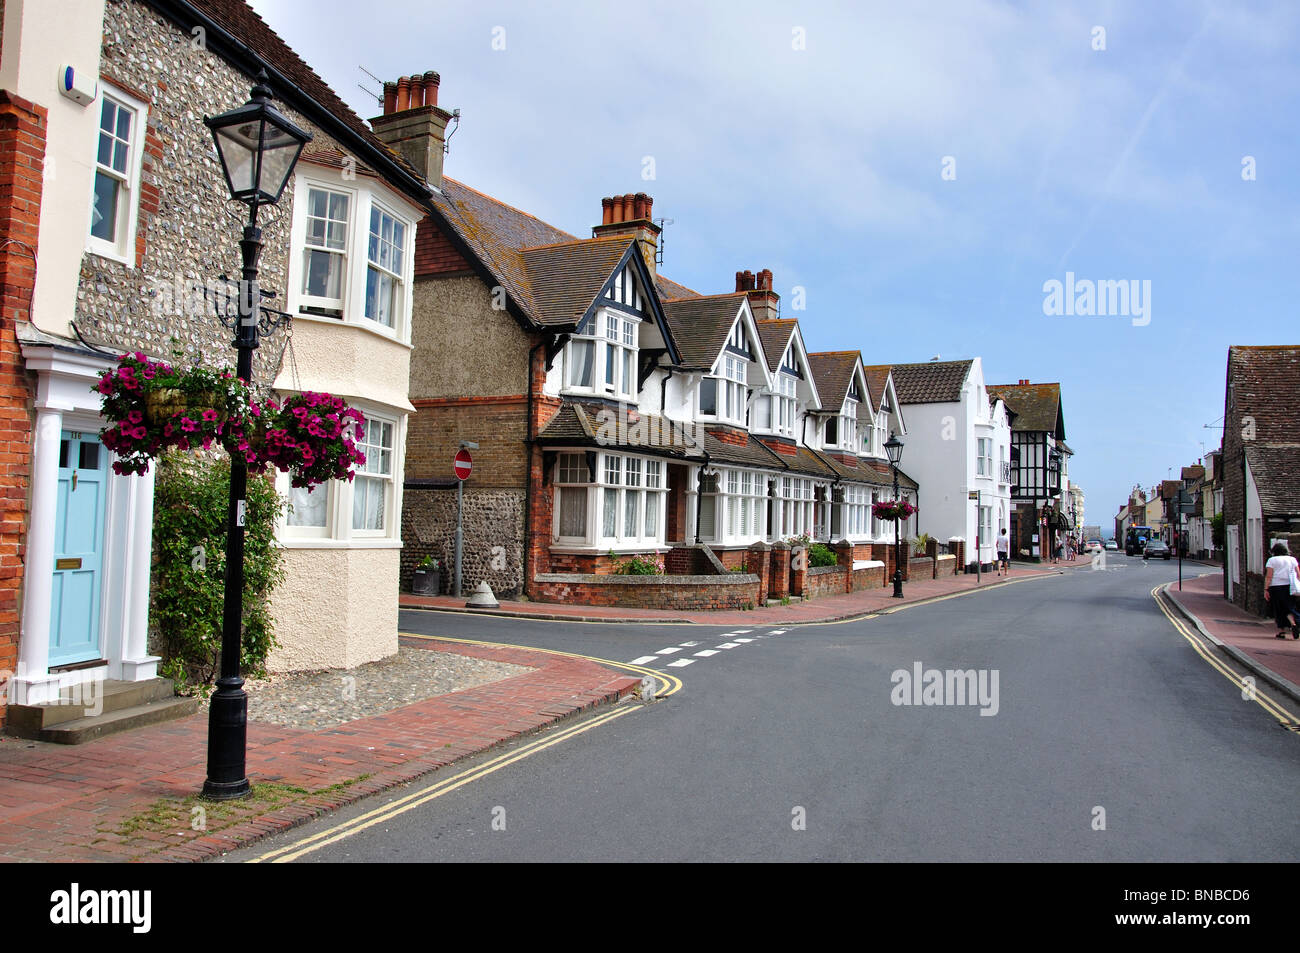 High Street, Rottingdean, East Sussex, Angleterre, Royaume-Uni Banque D'Images